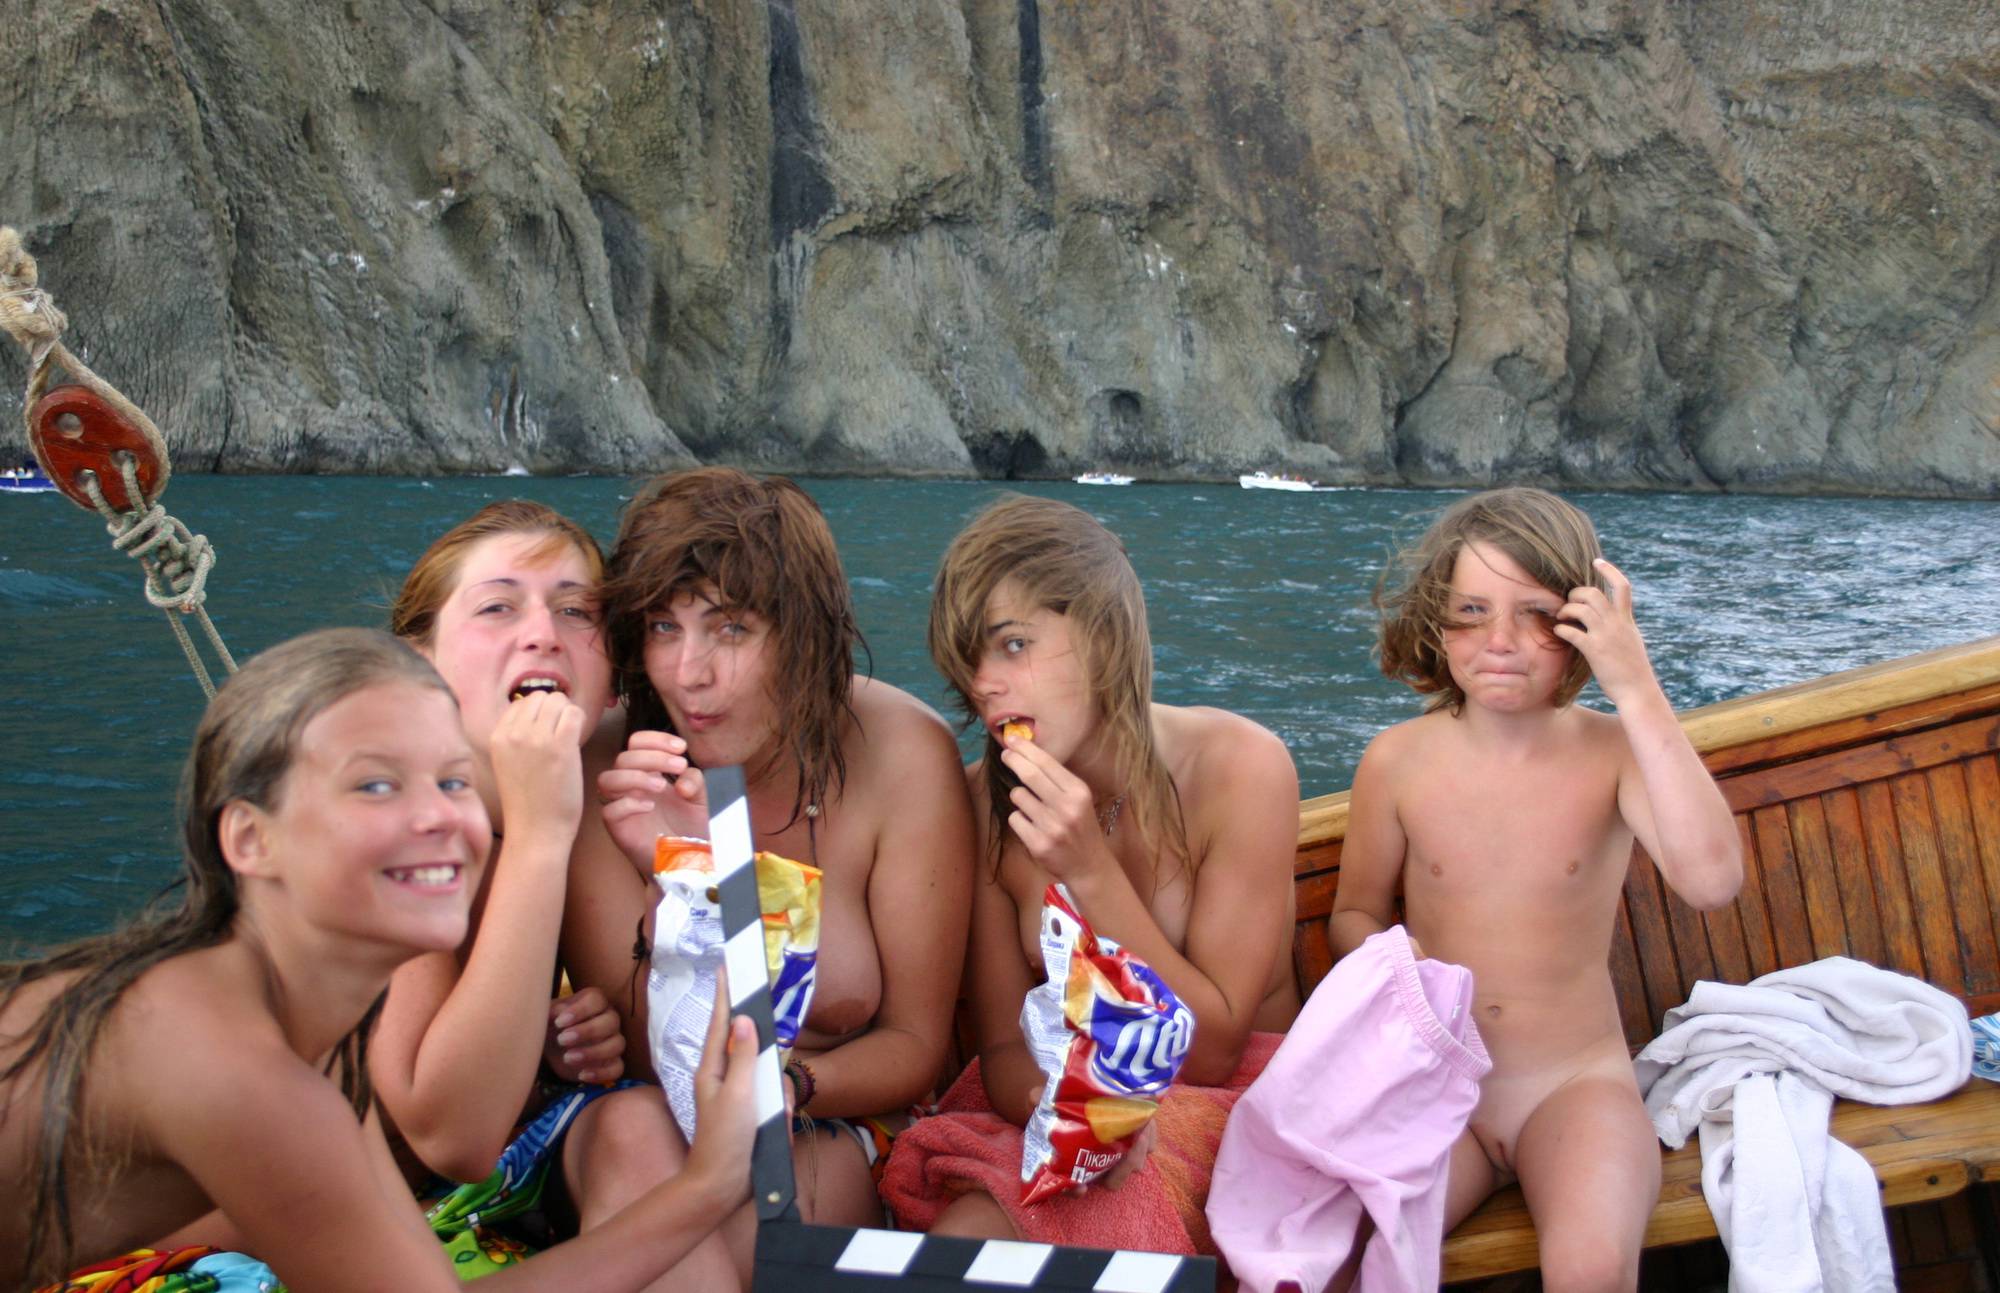 Nudist Pictures Group Snacking on Boat - 2